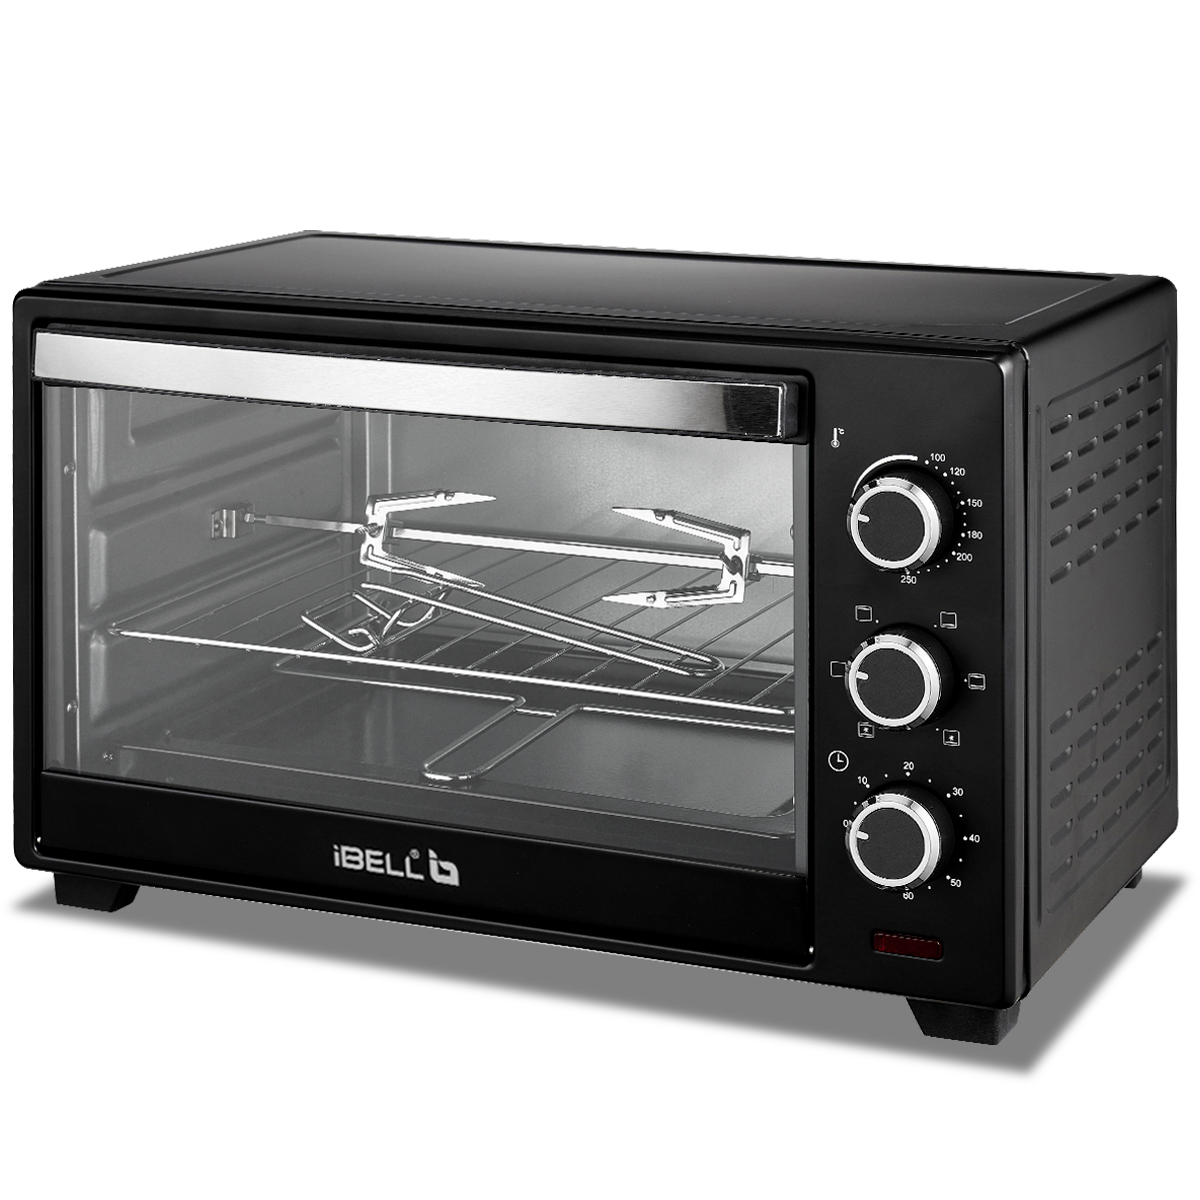 Ibell eo30lg 30 litre electric oven toaster grill with rotisserie